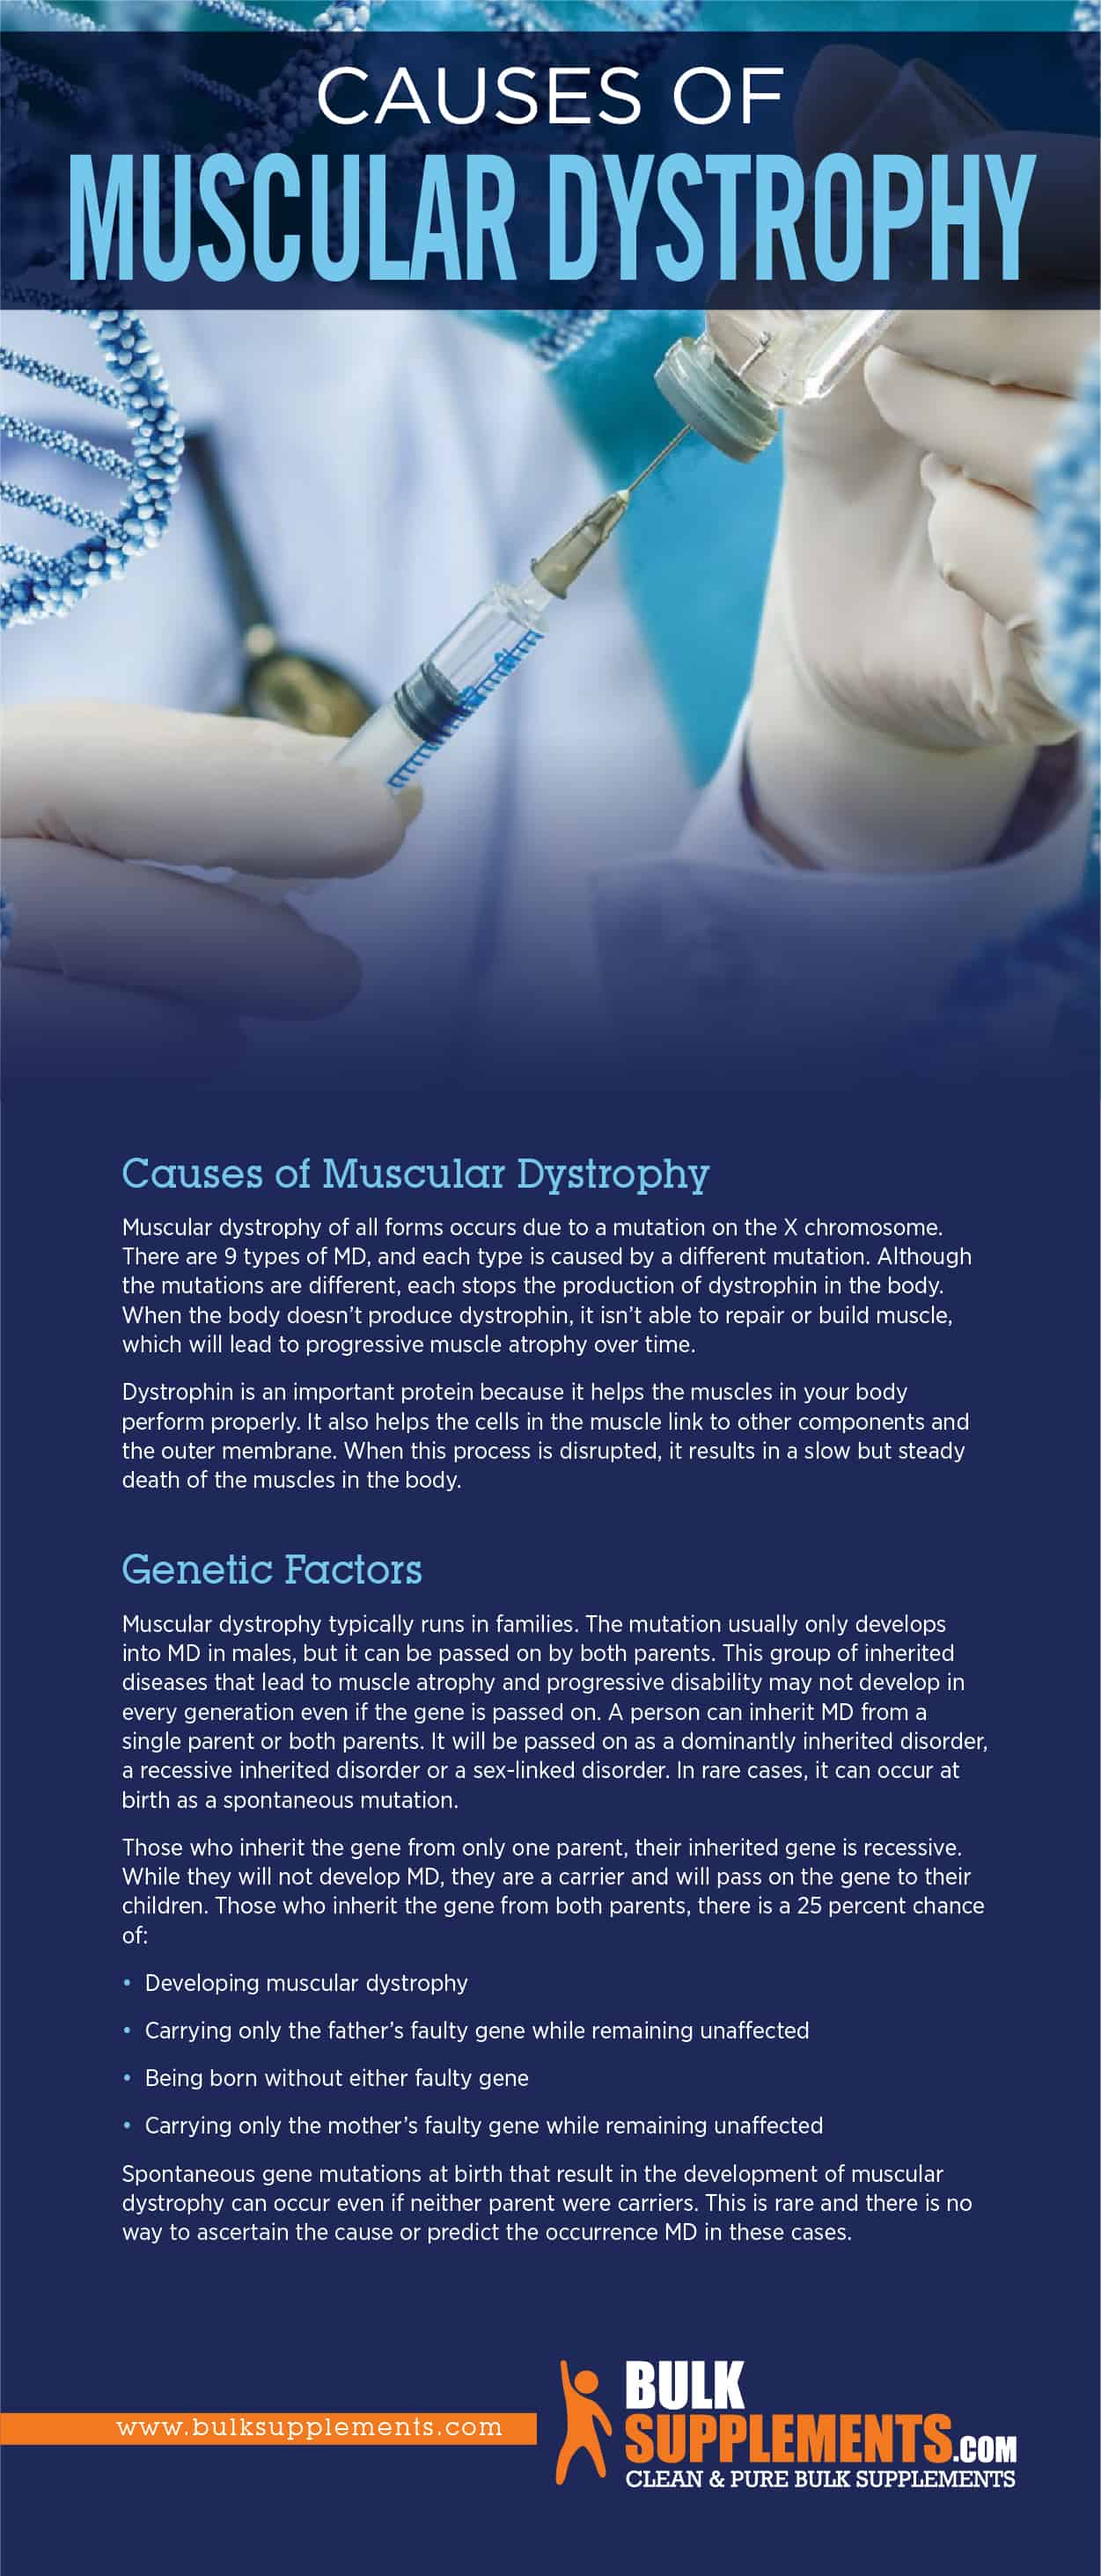 Causes of Muscular Dystrophy